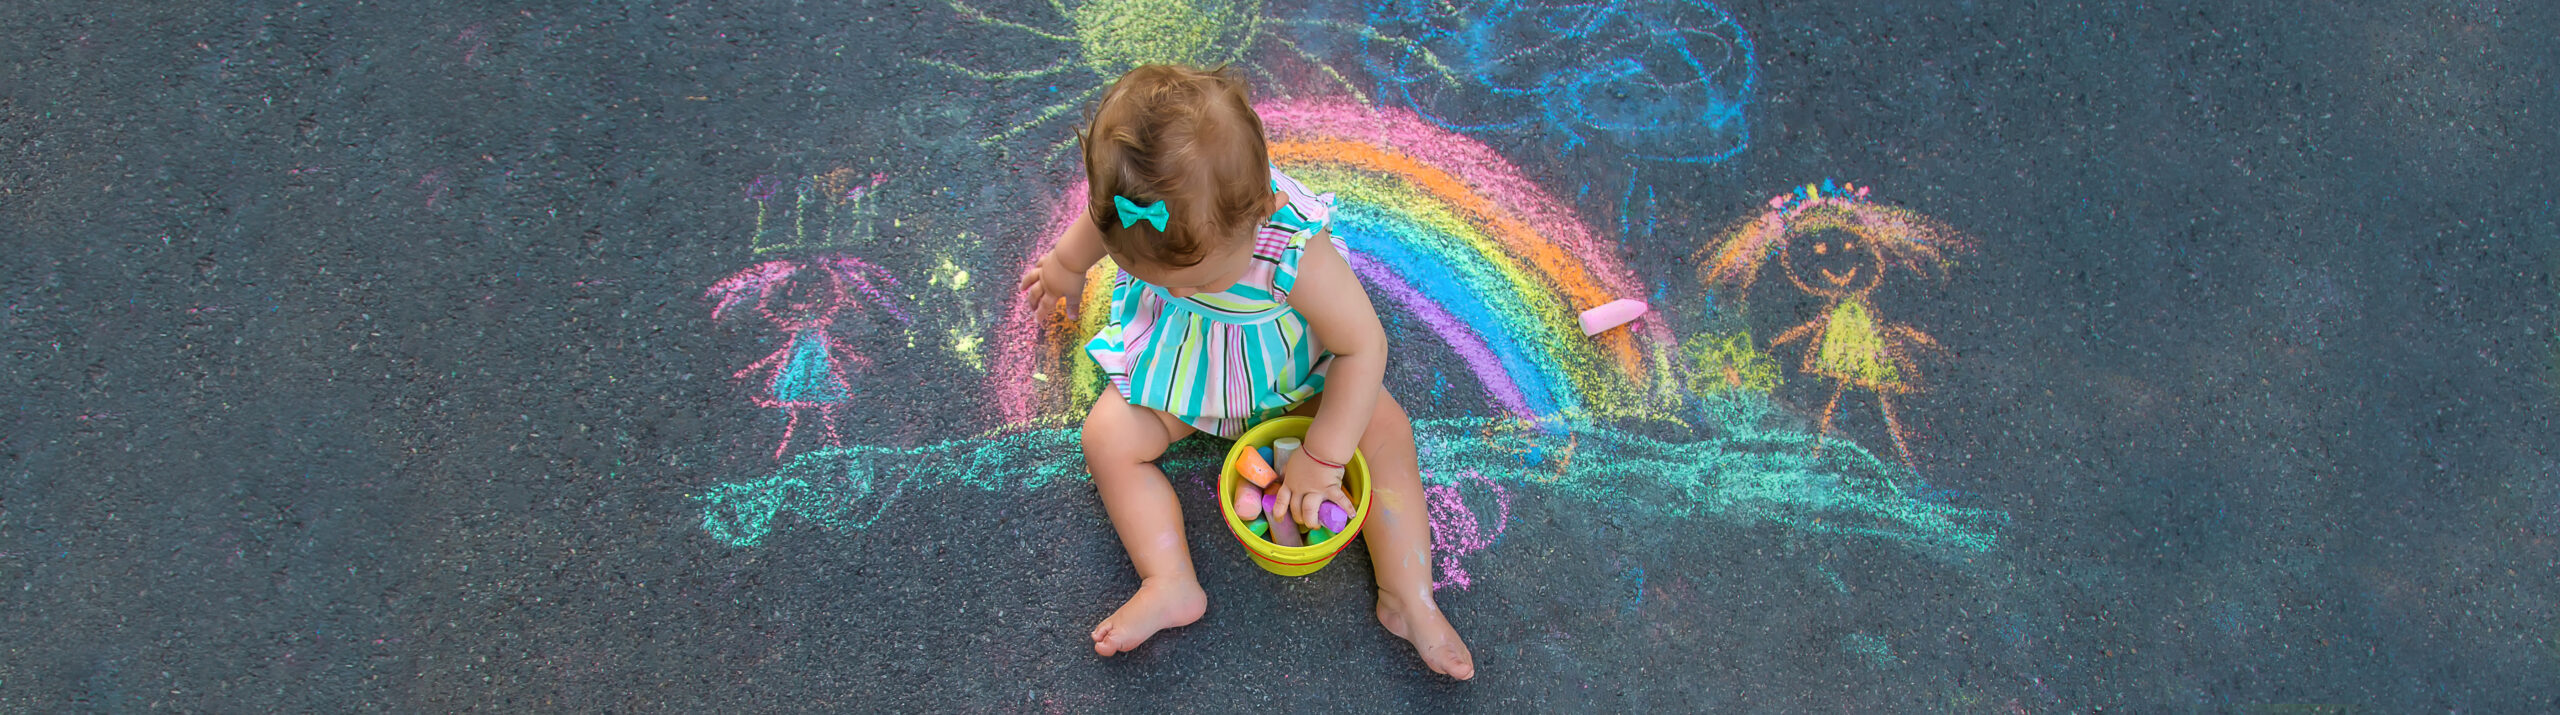 Baby draws a rainbow on the pavement with chalk.